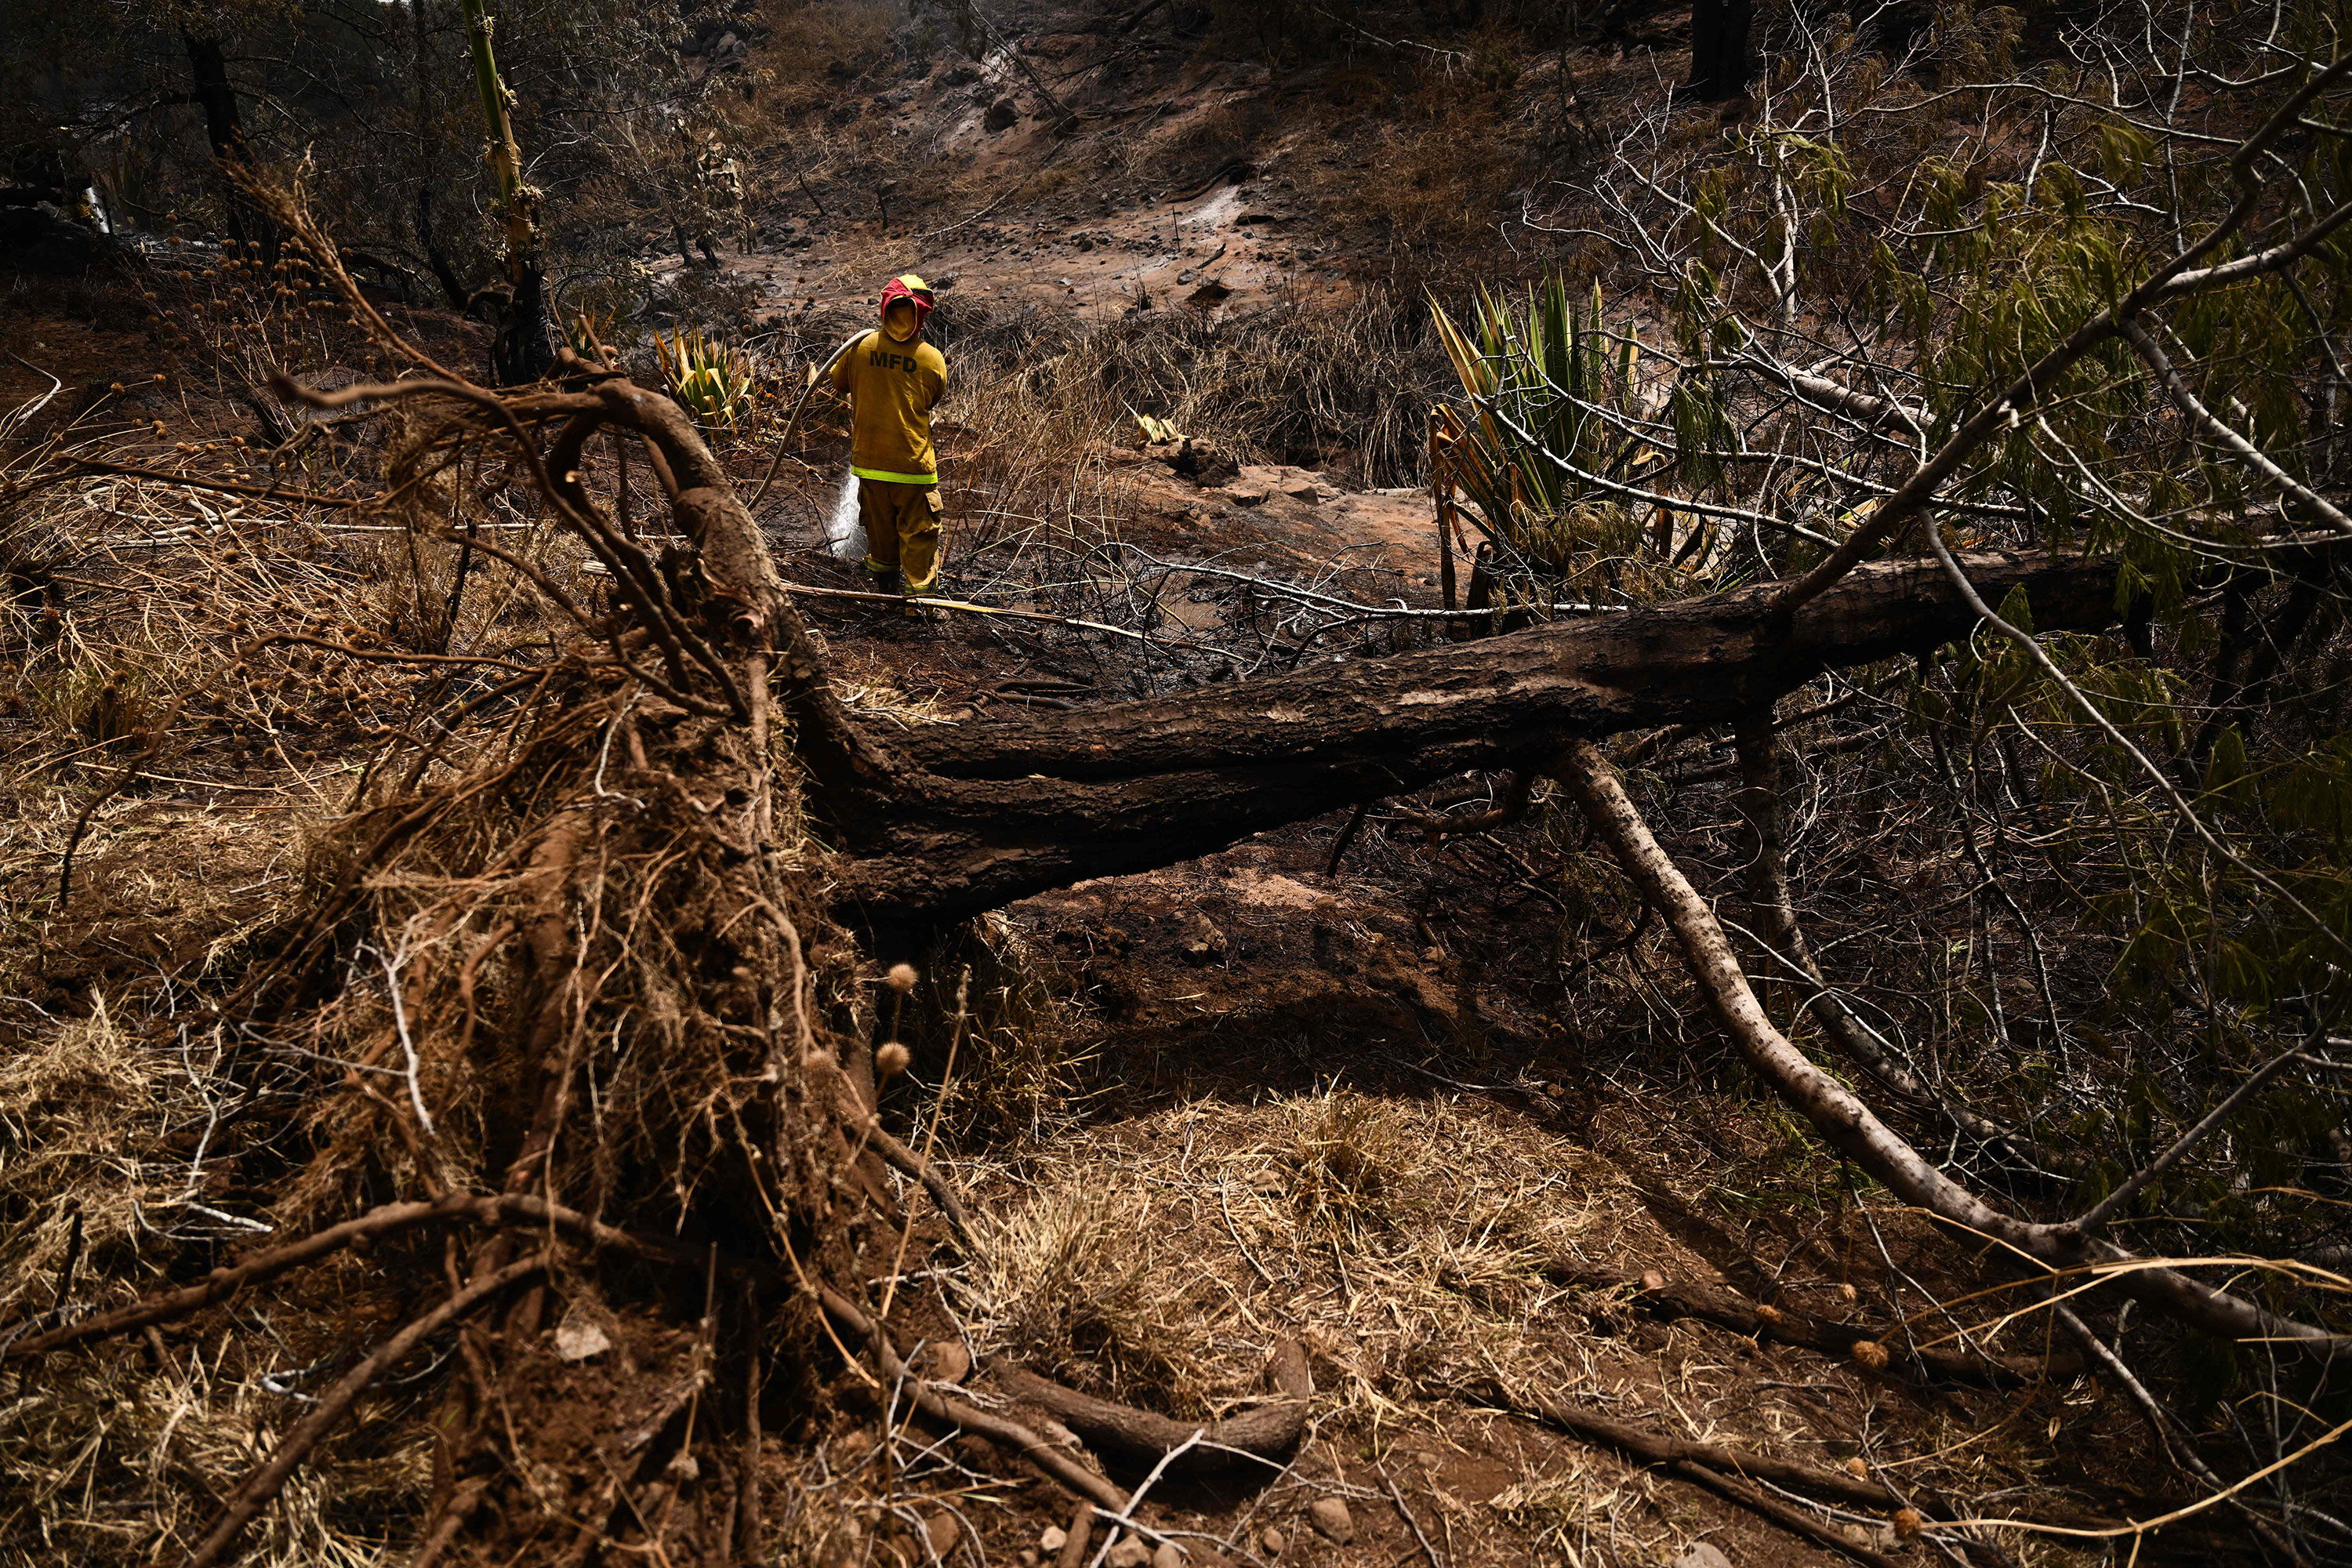 Firefighters work around a fallen tree in Kula on Sunday that was uprooted by high winds.